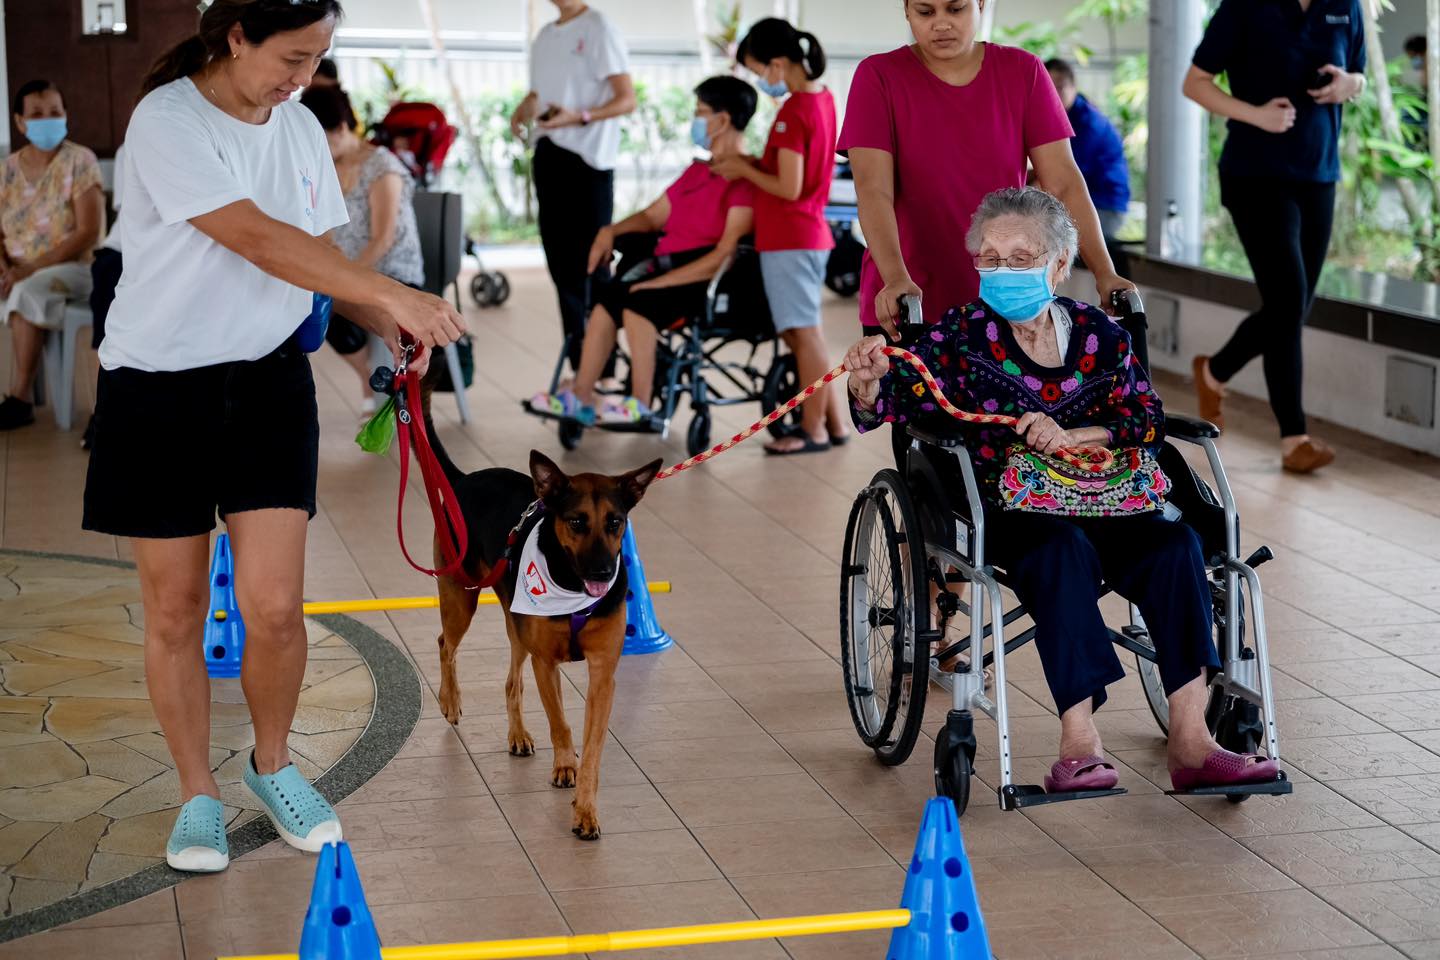 woman in wheelchair alongside pup on a leash as part of the programme.